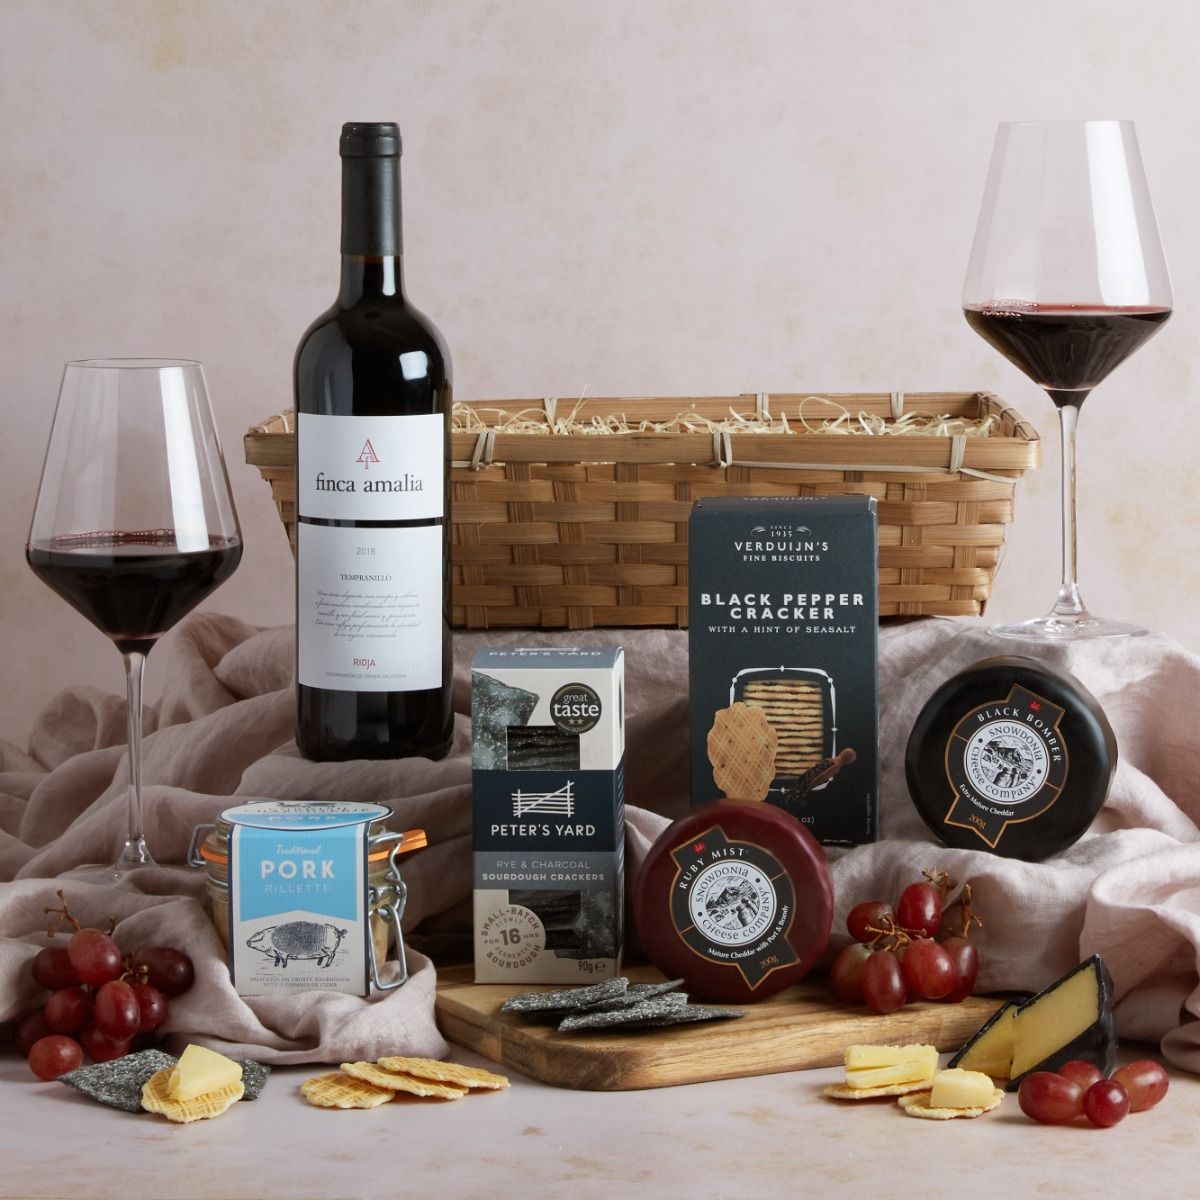 Wine, cheese & rillette hamper with contents on display including a glass of red wine